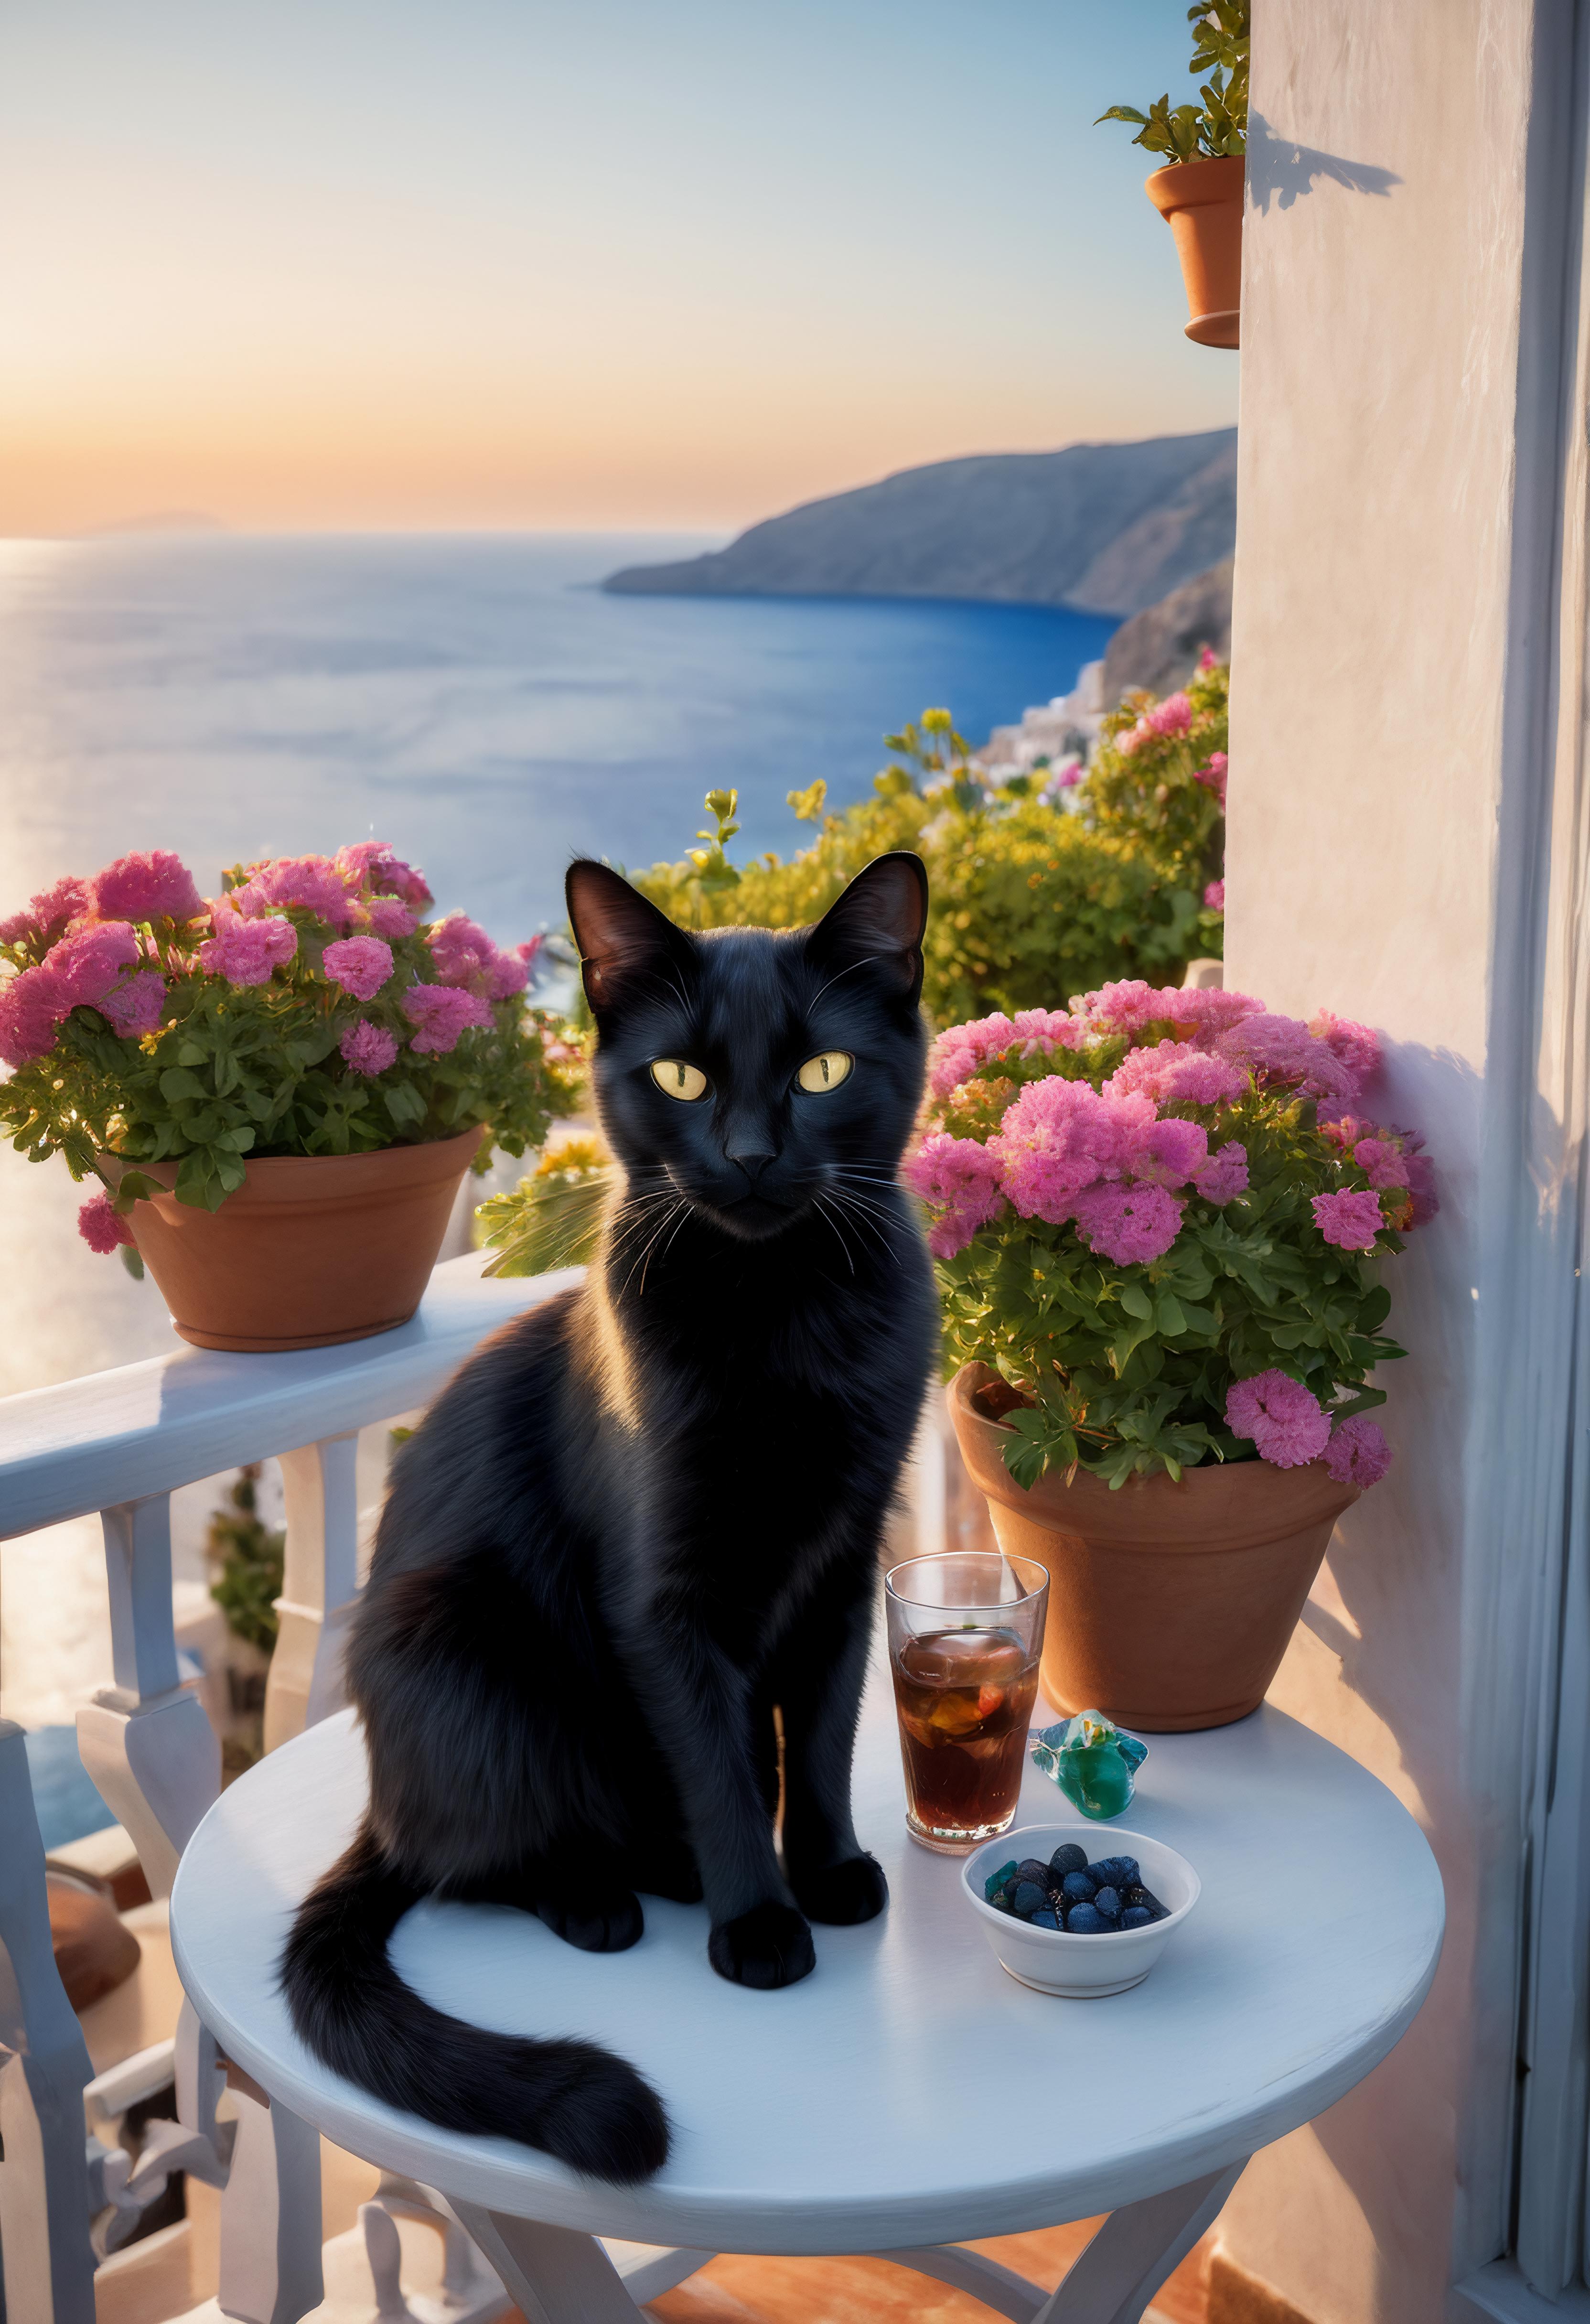 A black cat sitting on a table with a glass of water and a bowl of blueberries.